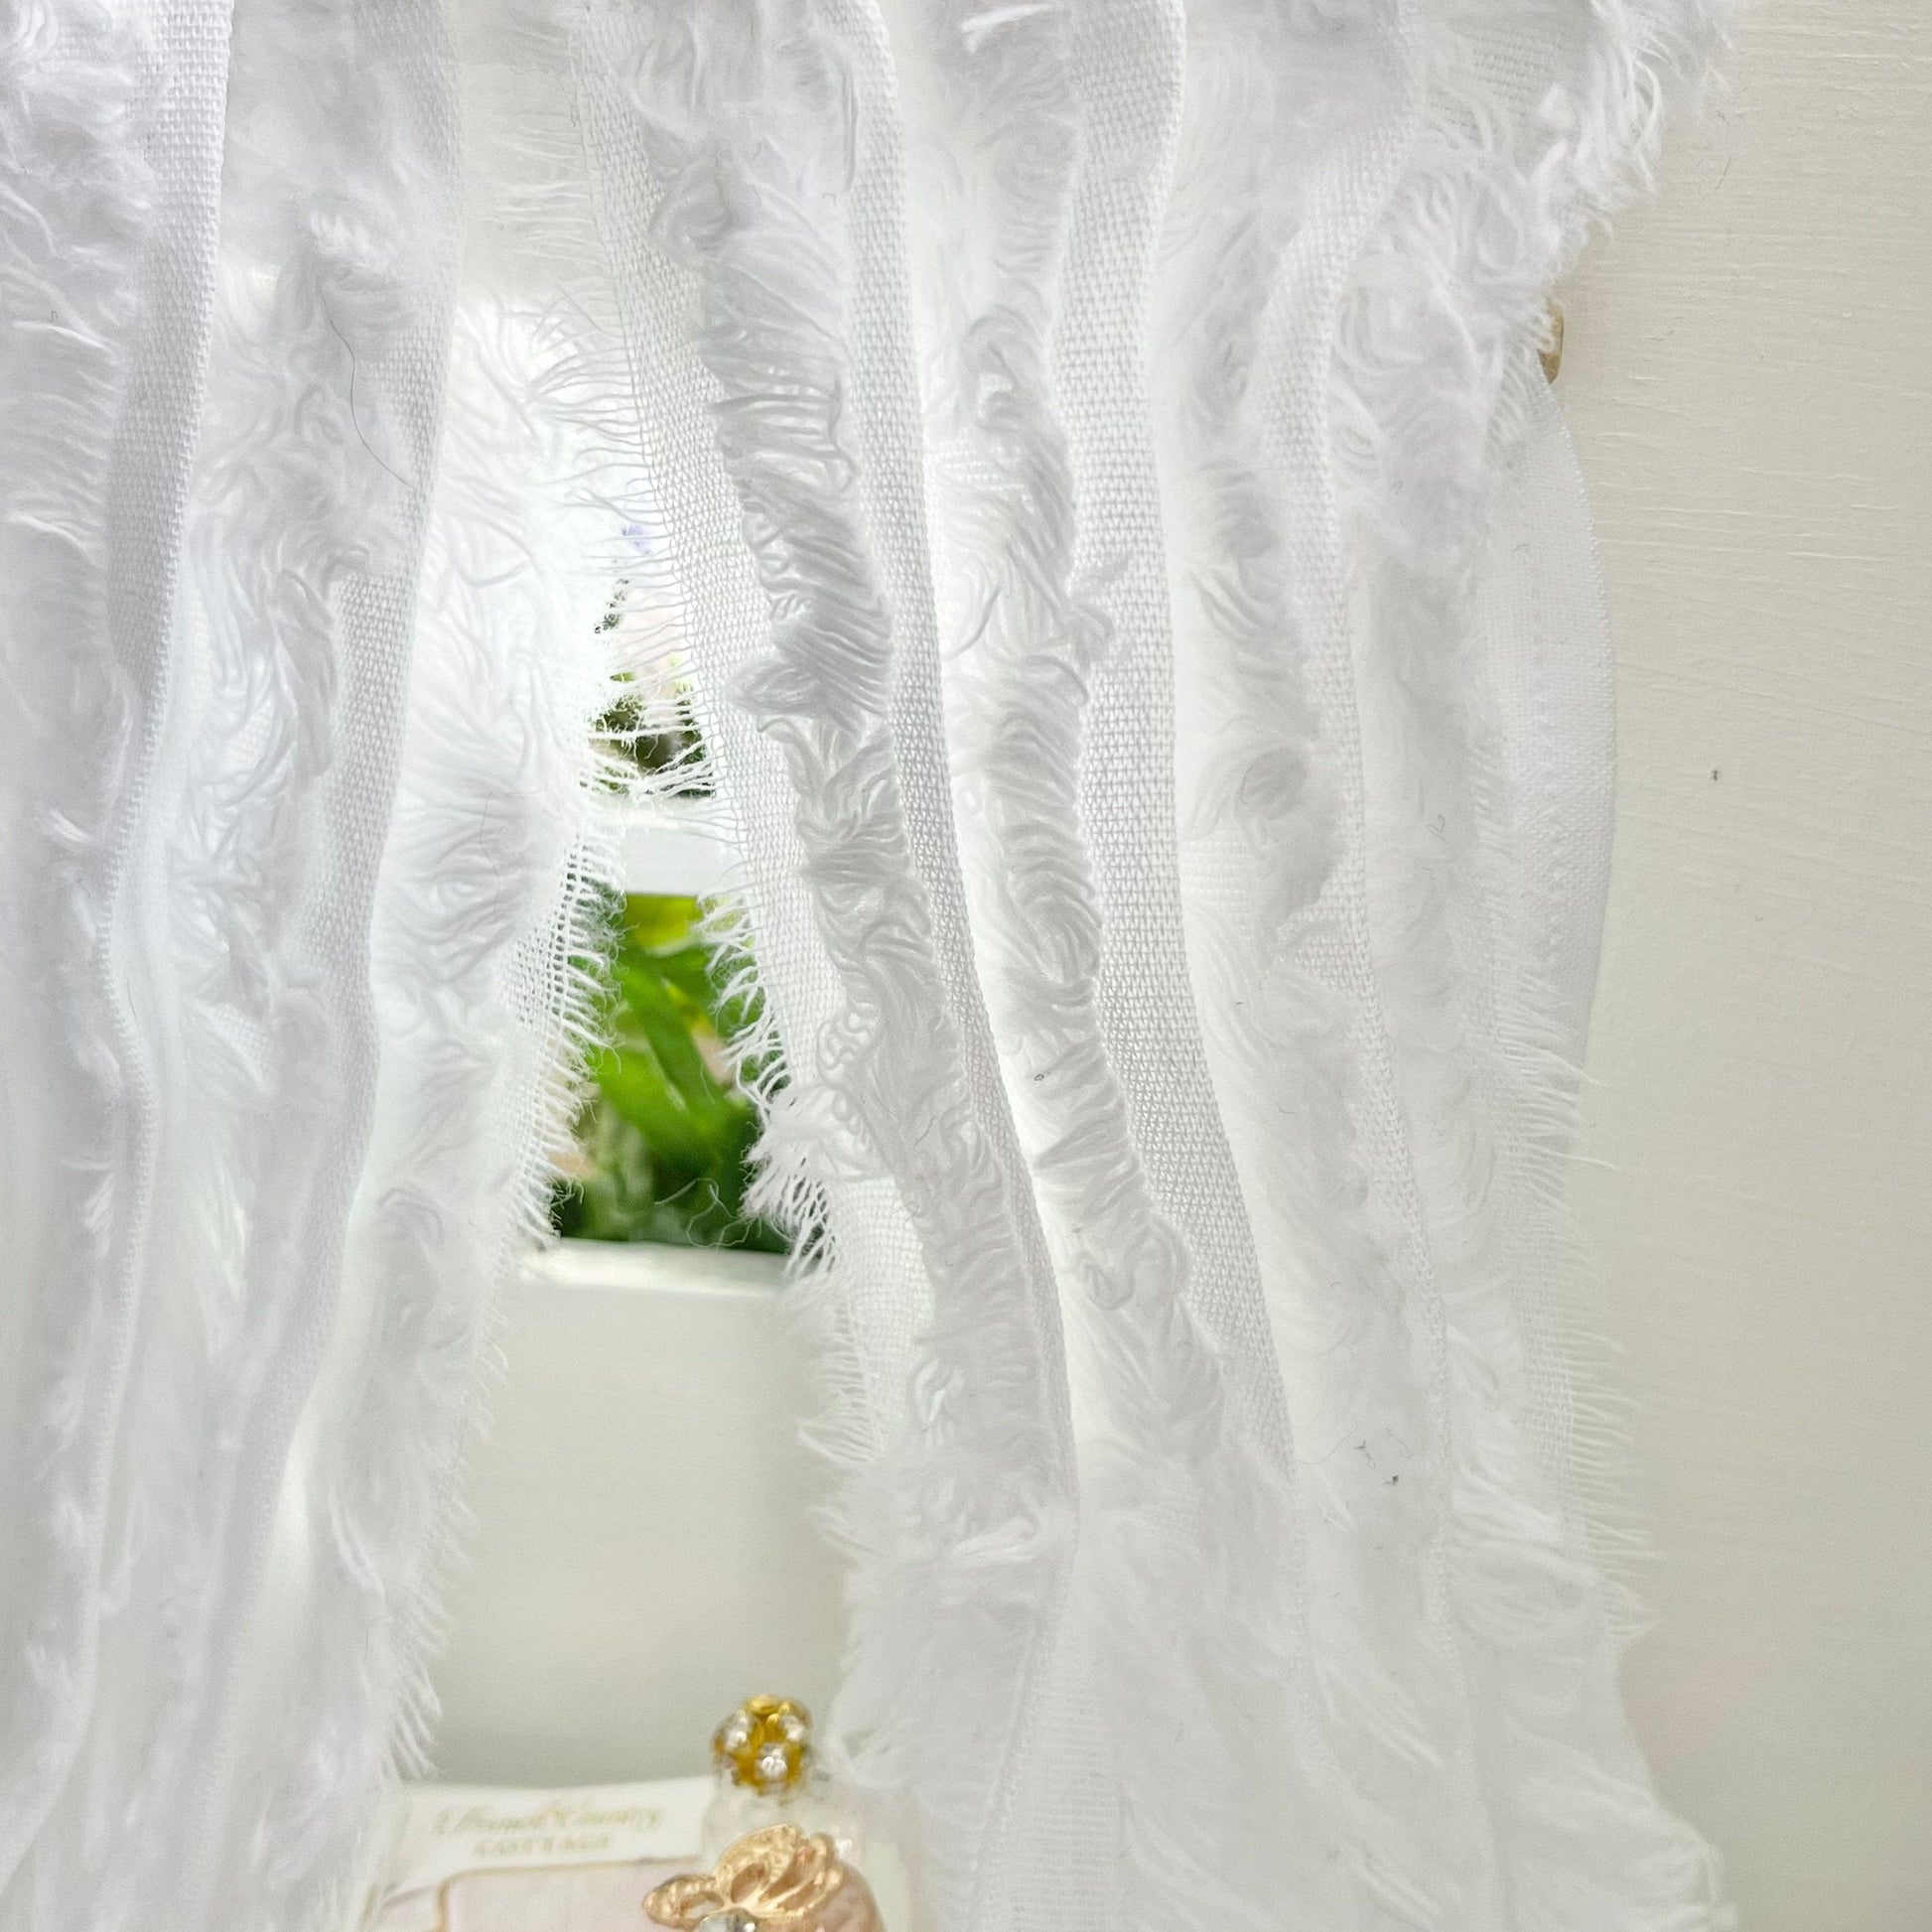 Chantallena Doll House CURTAINS - White Fringed 2 Panel Cotton Curtains | White Fringe | Soft Furnishings